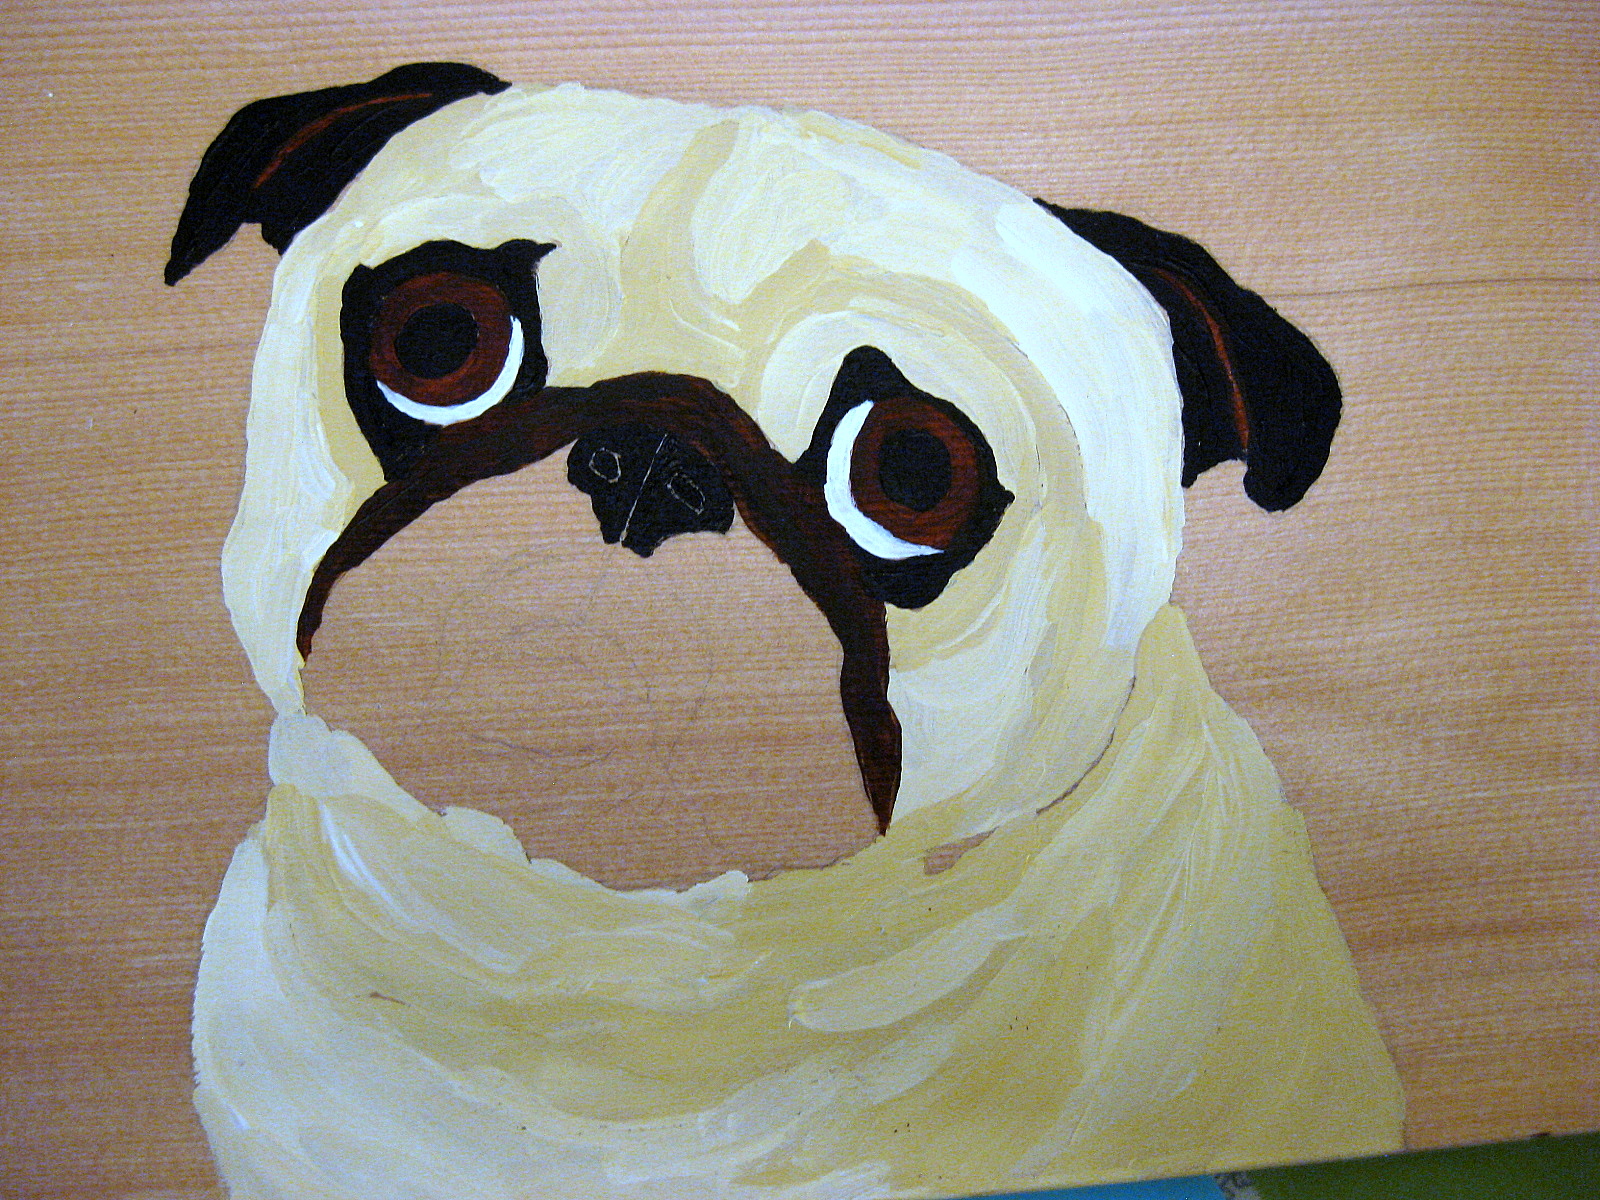 Life is art Art is Life: My Newest Pug Painting ~ Pug Design A92